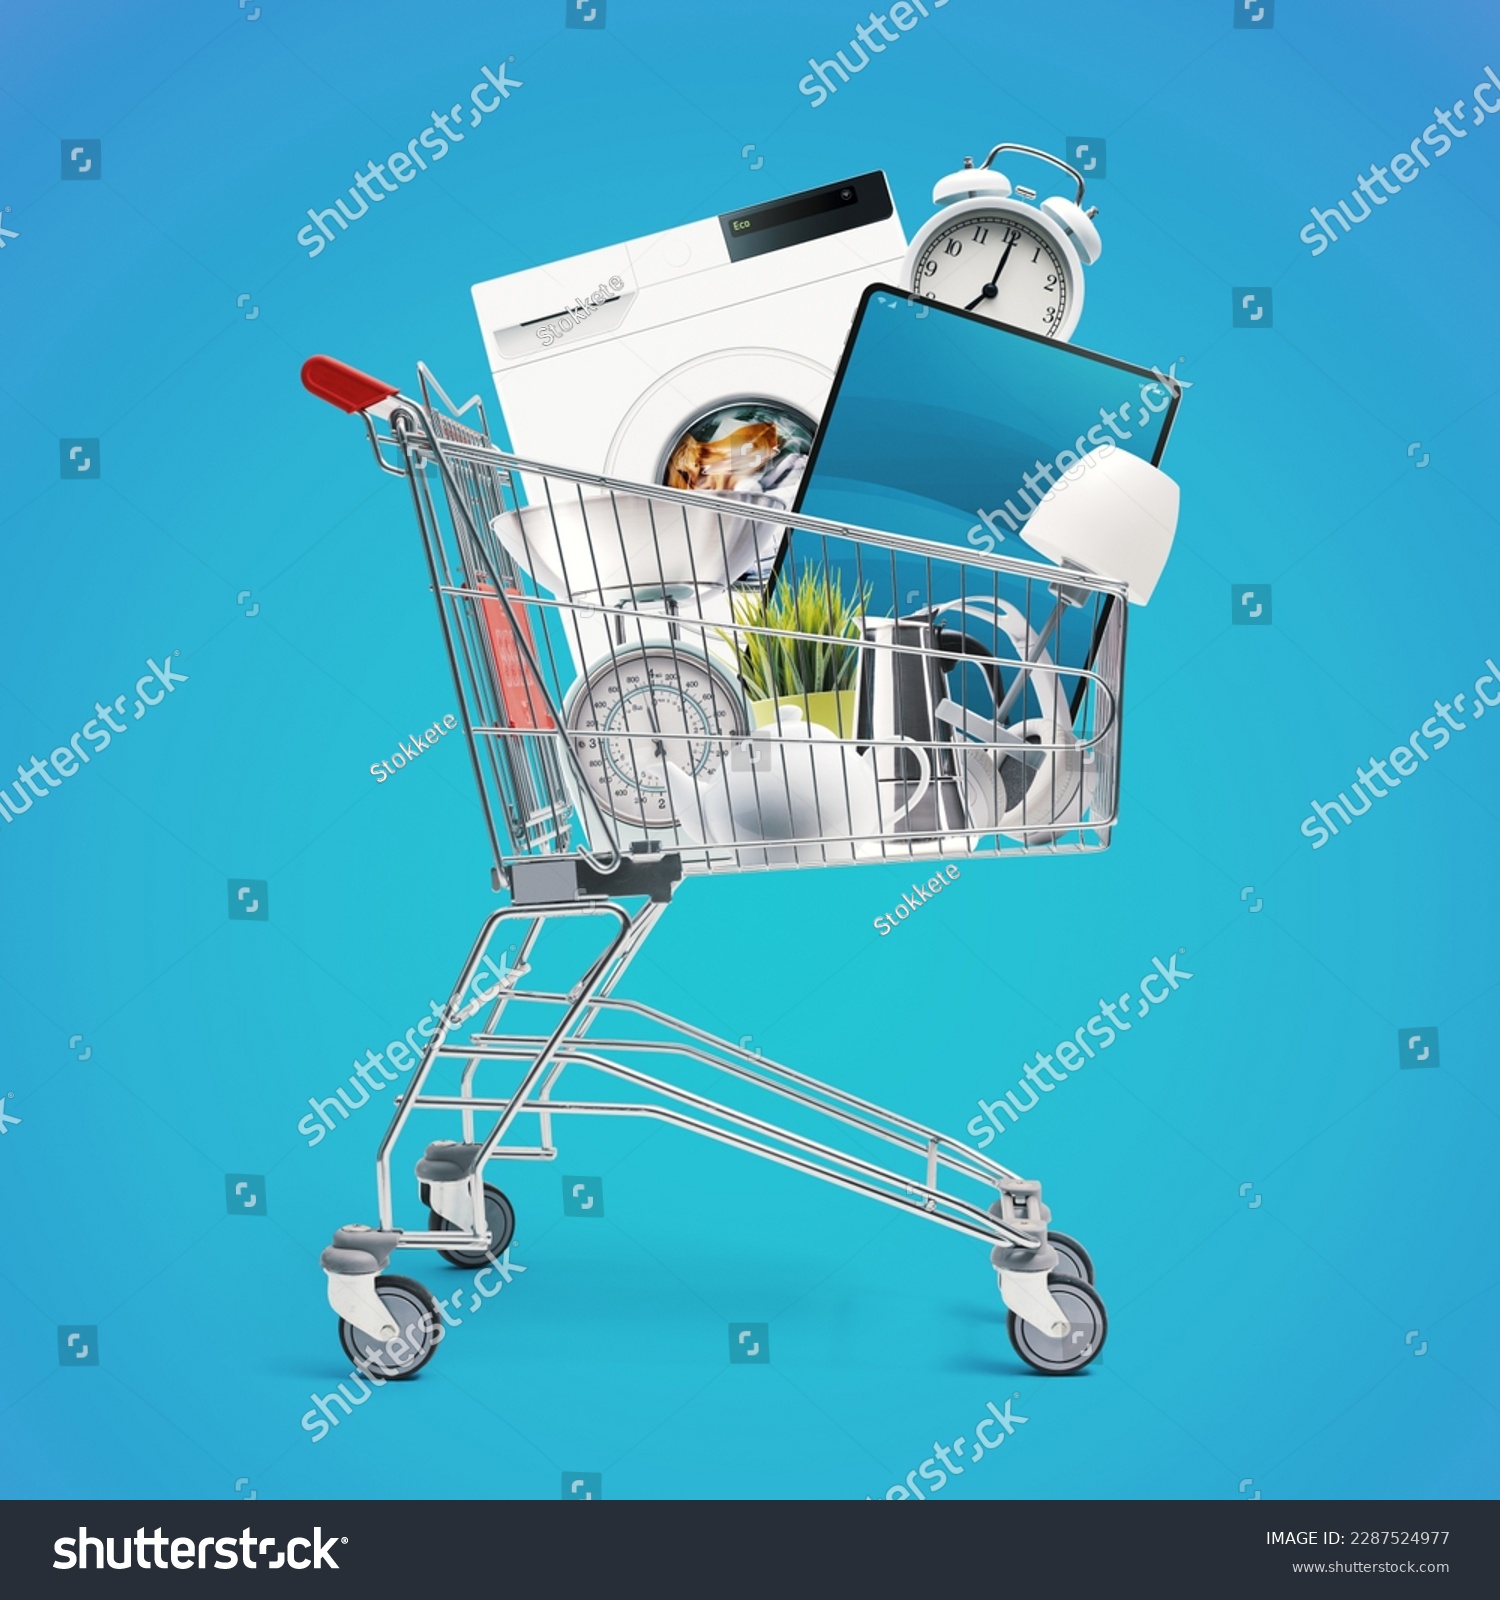 Shopping cart full of household goods, appliances and electronics: sales and retail concept #2287524977